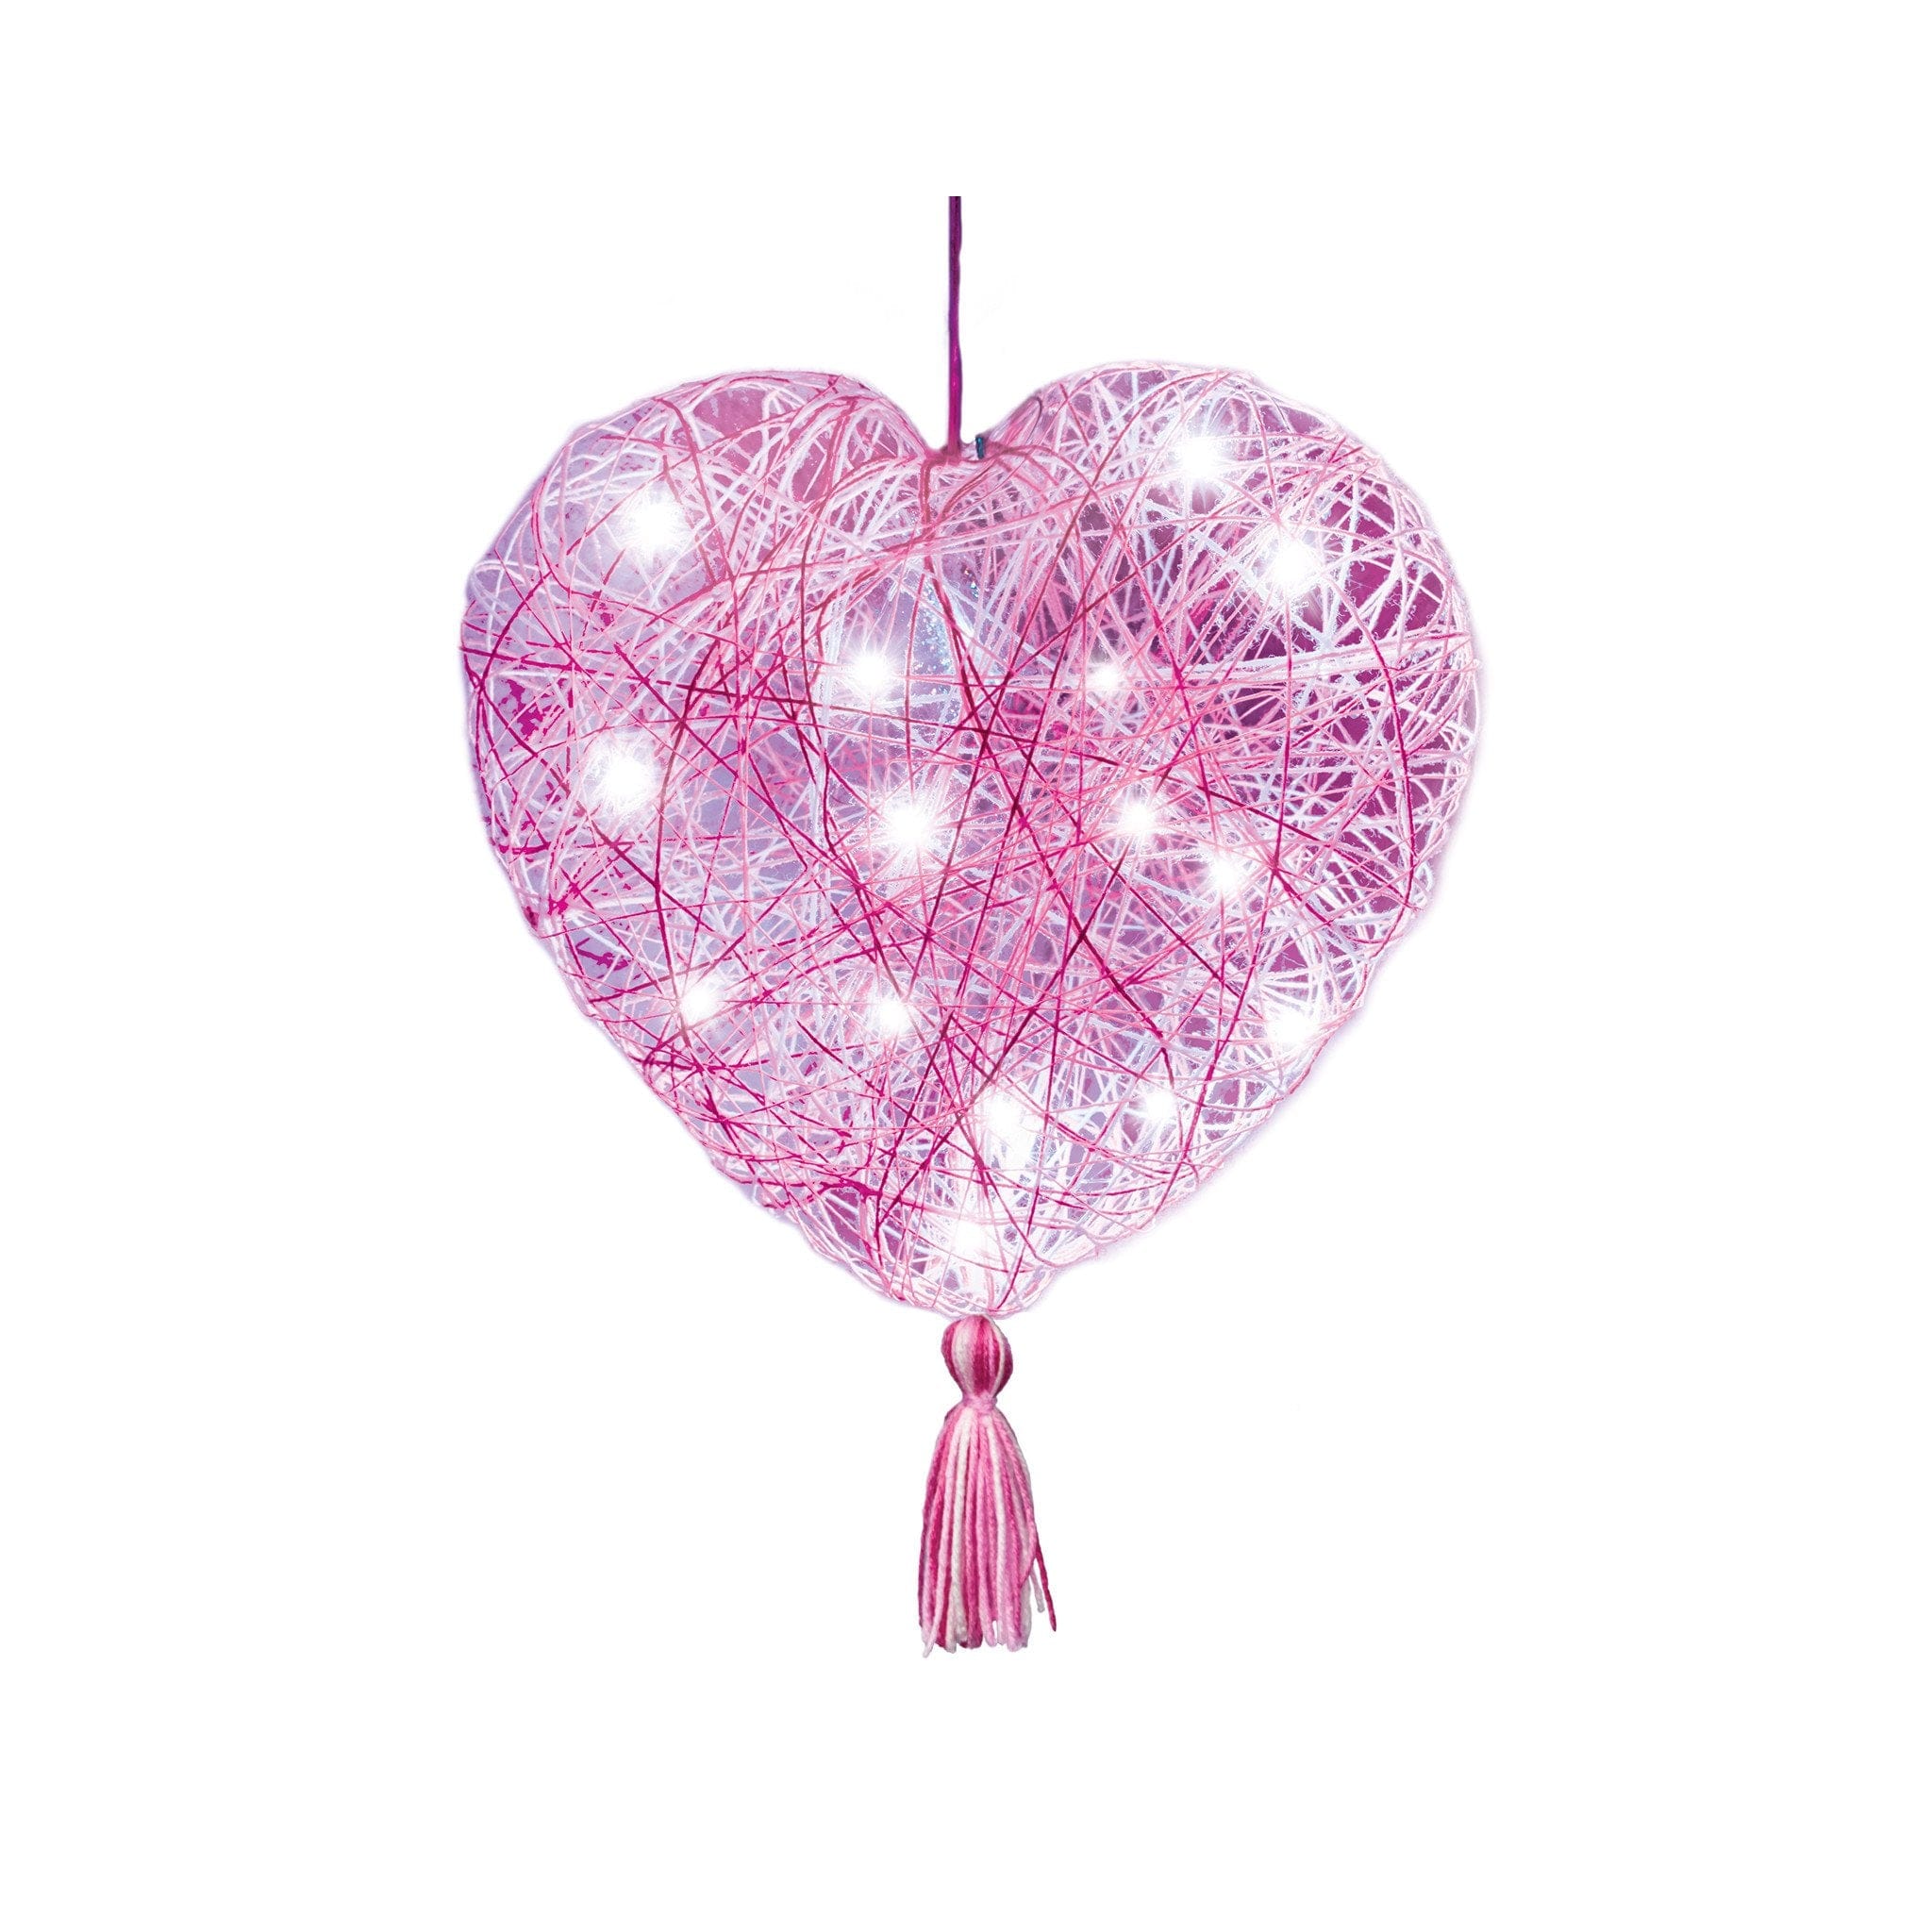 GTBW Creativity For Kids String Art Heart Light: Wrap the inflatable heart with pink ombré yarn, glow string and craft glue - 6180